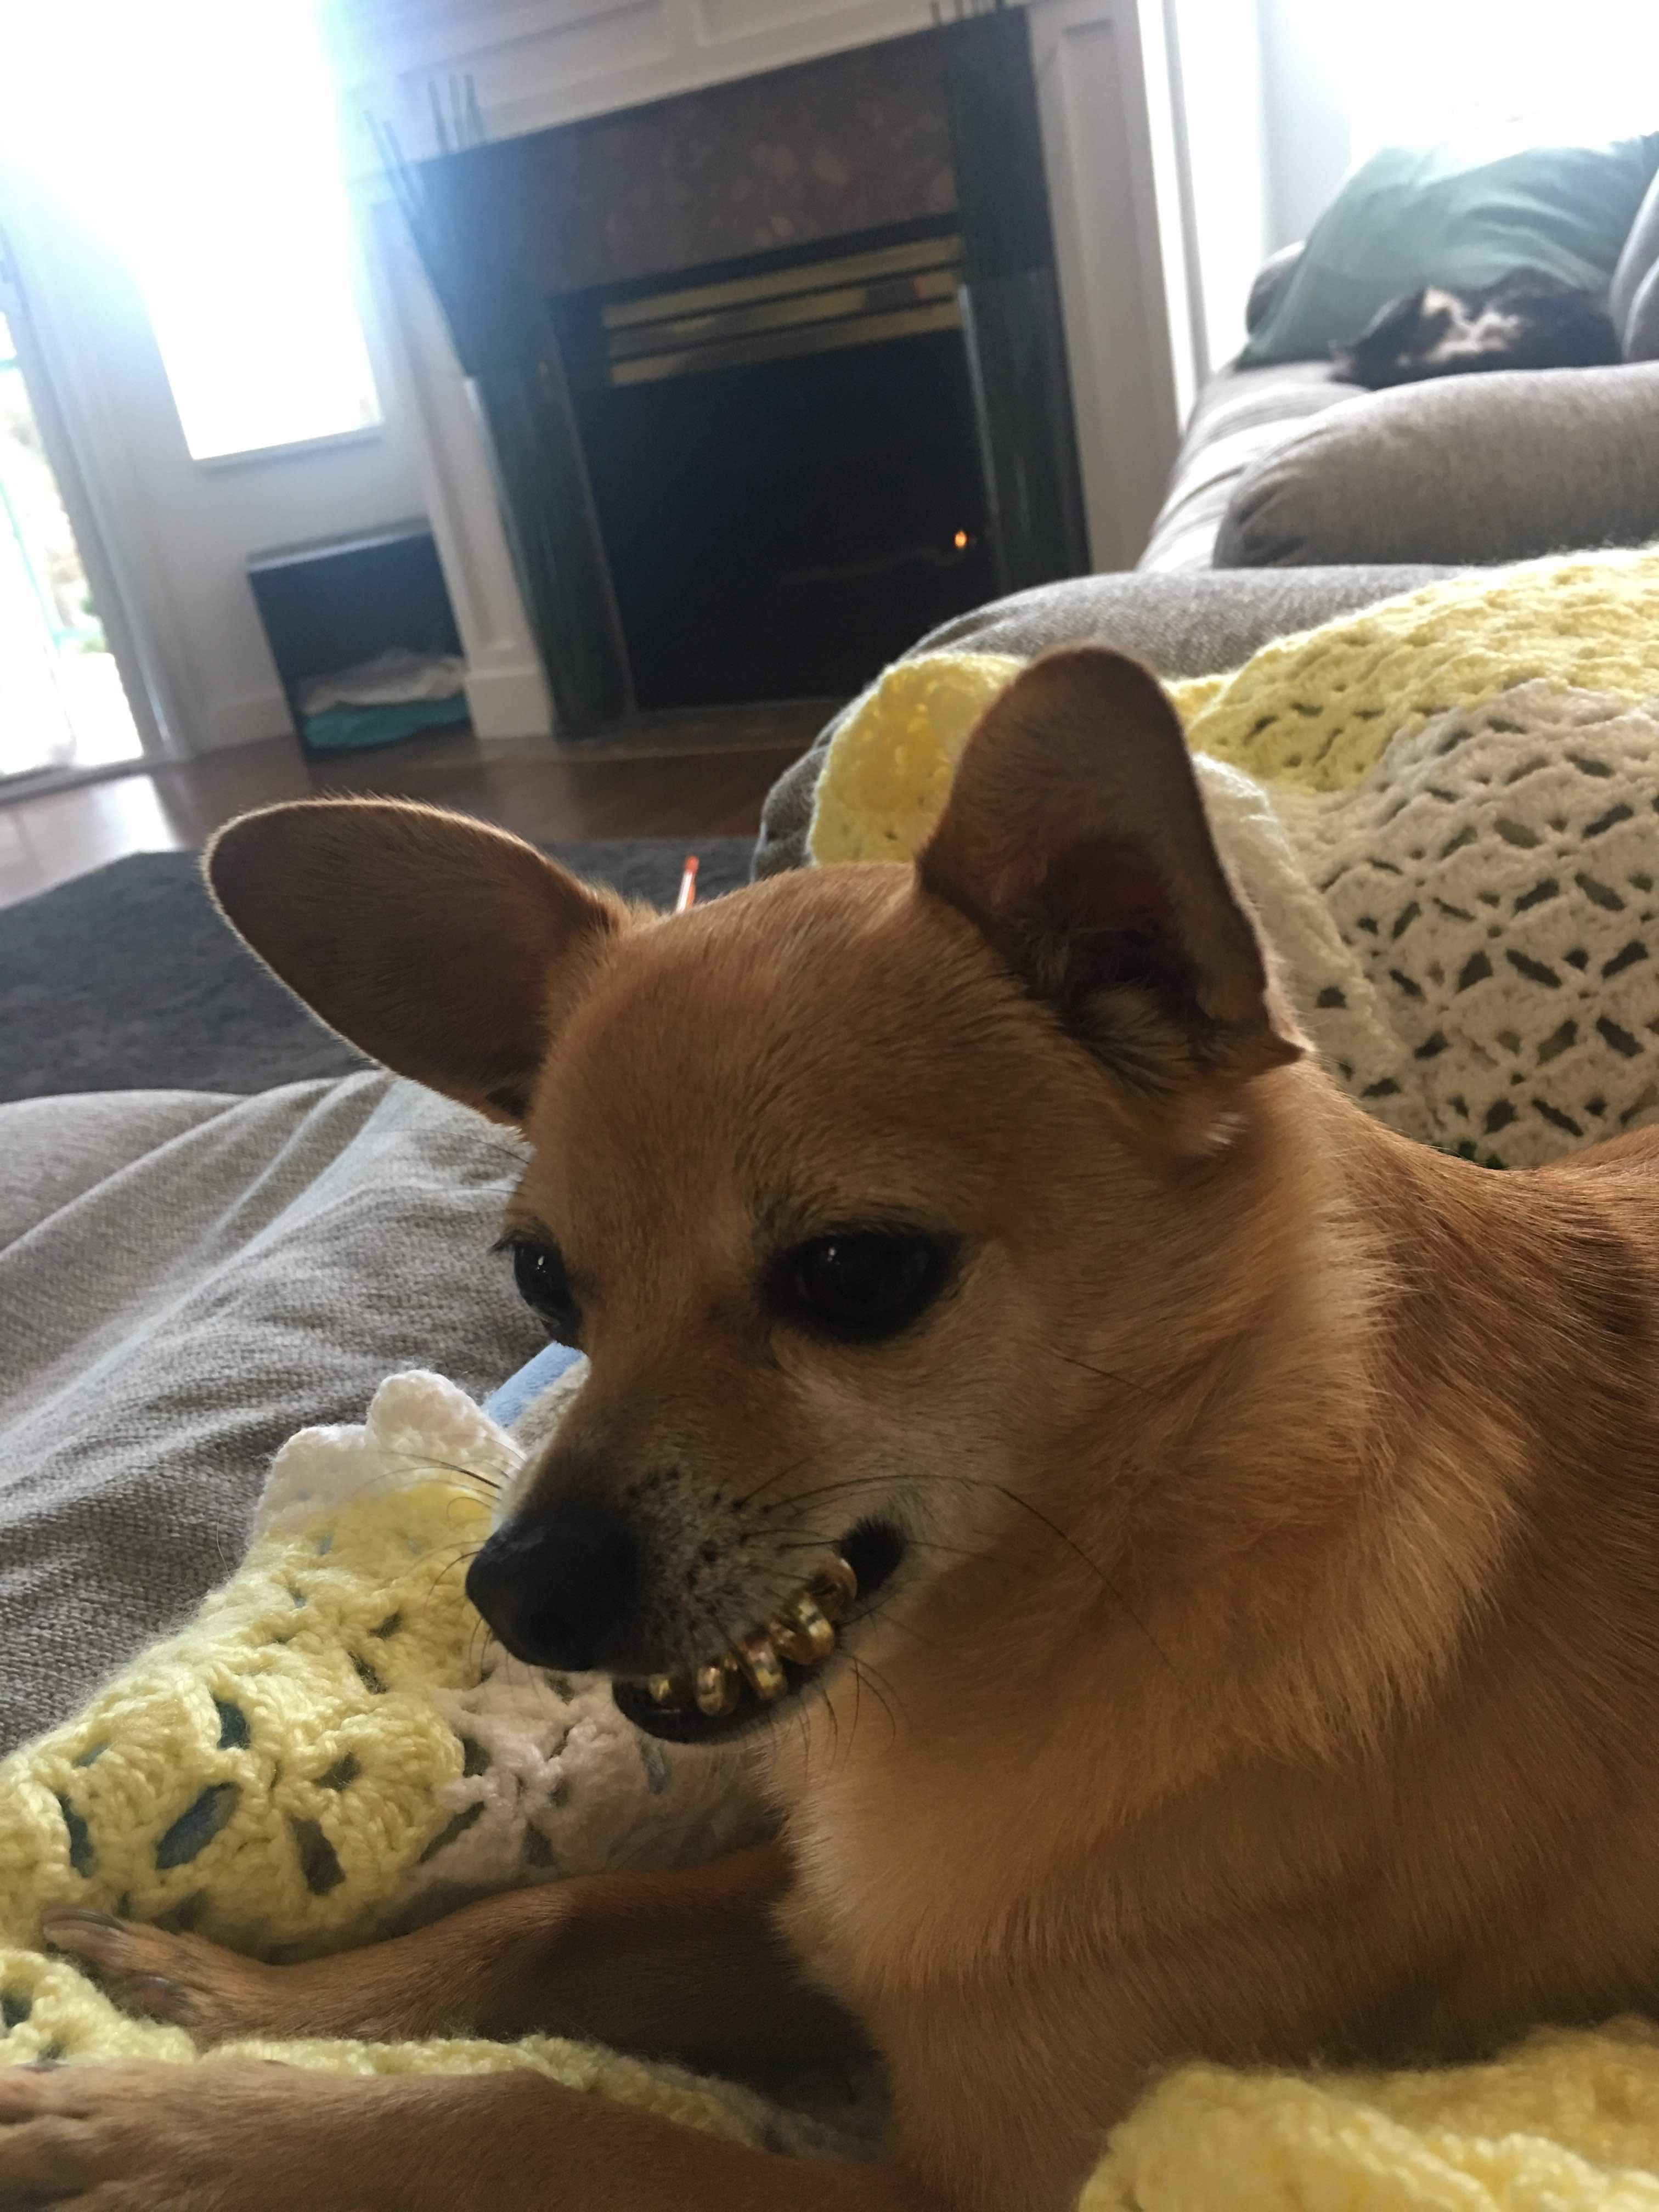 My dog likes to fetch hair ties and hold them in his mouth, making him look like he's wearing grills